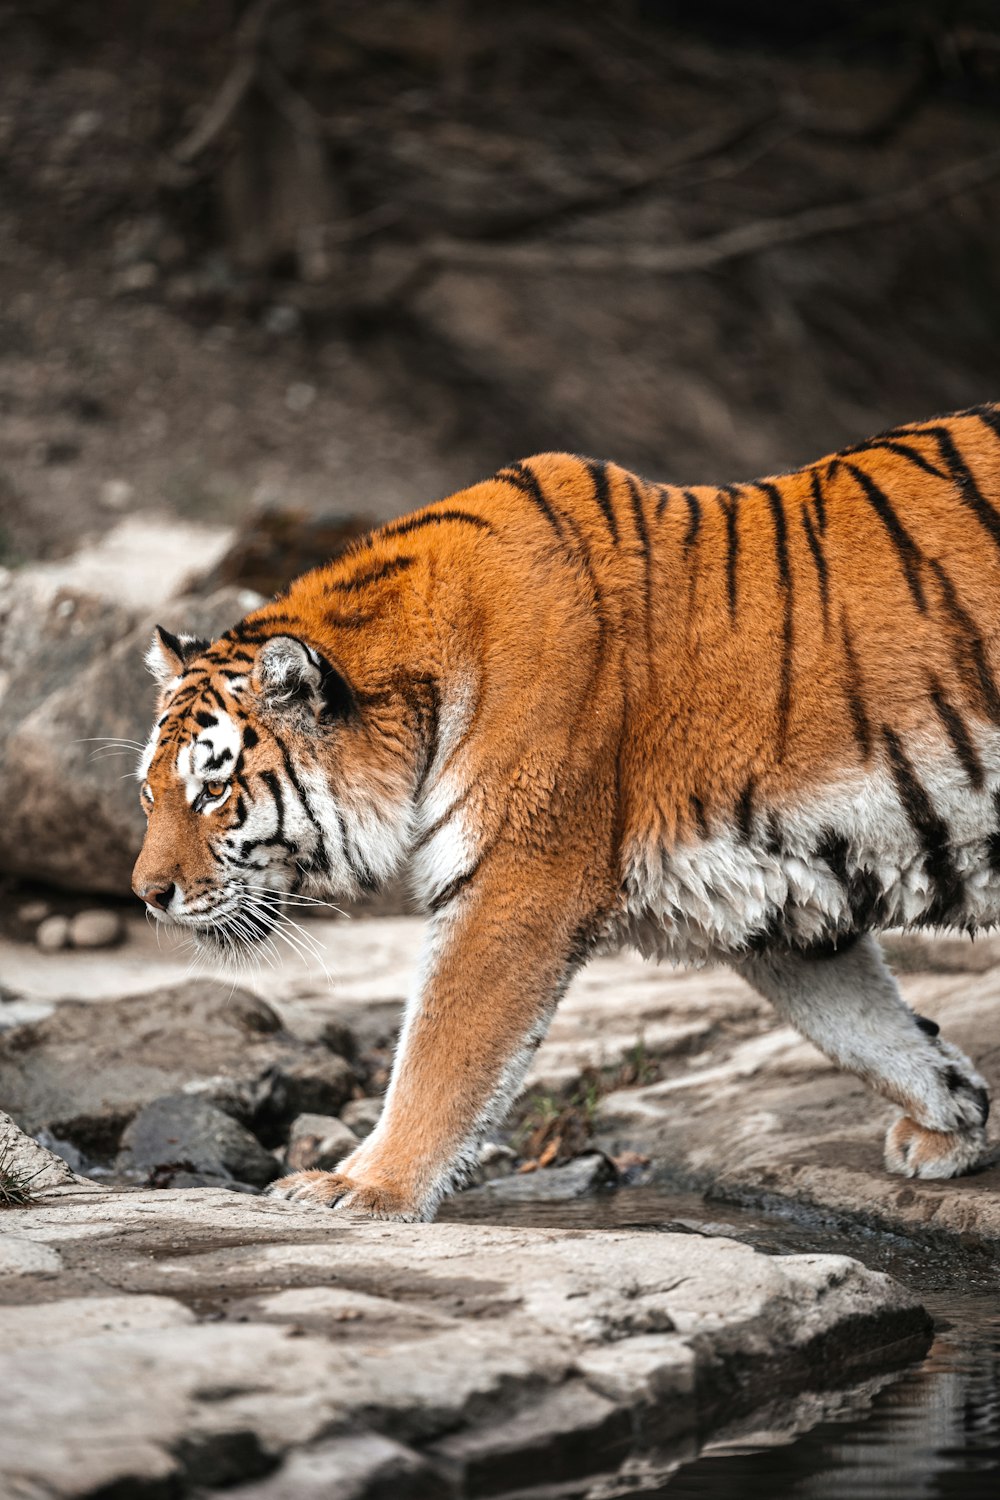 a tiger walking across a rocky area next to a body of water